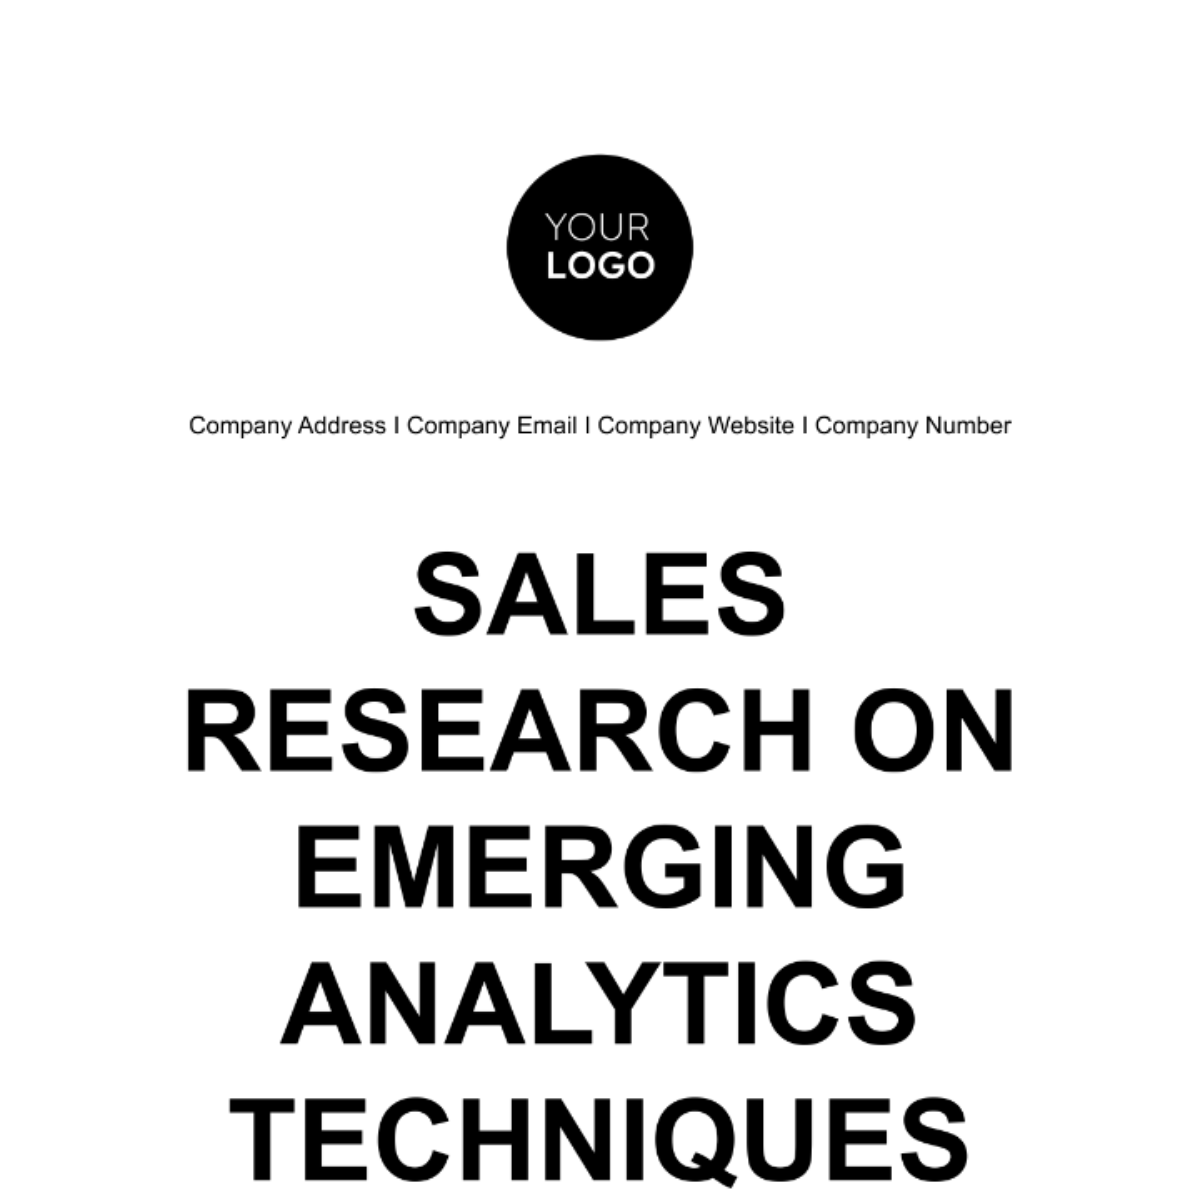 Sales Research on Emerging Analytics Techniques Template